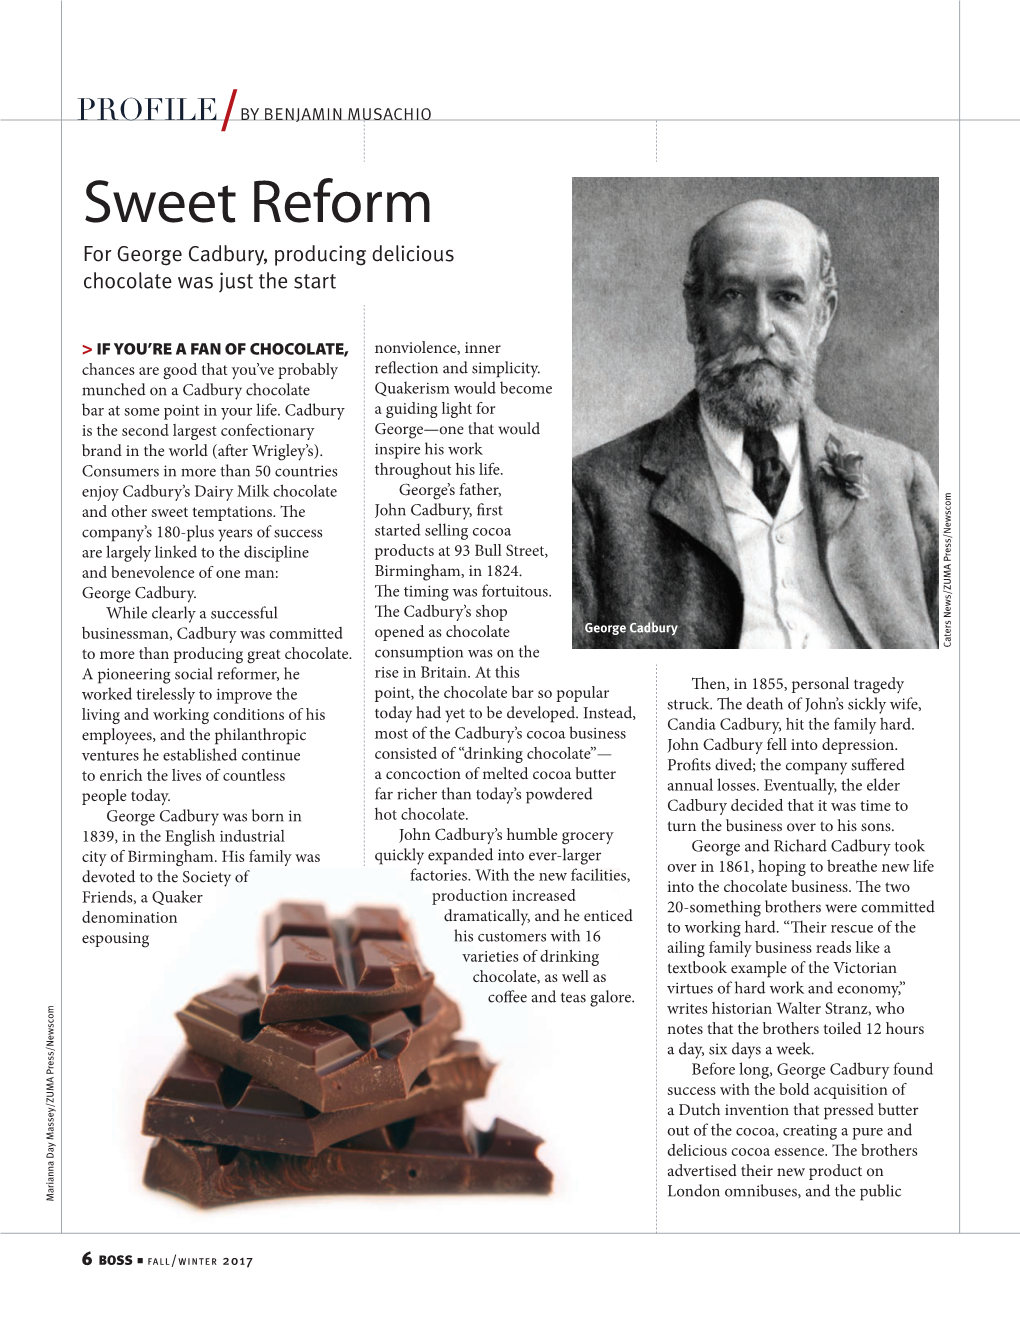 Sweet Reform for George Cadbury, Producing Delicious Chocolate Was Just the Start